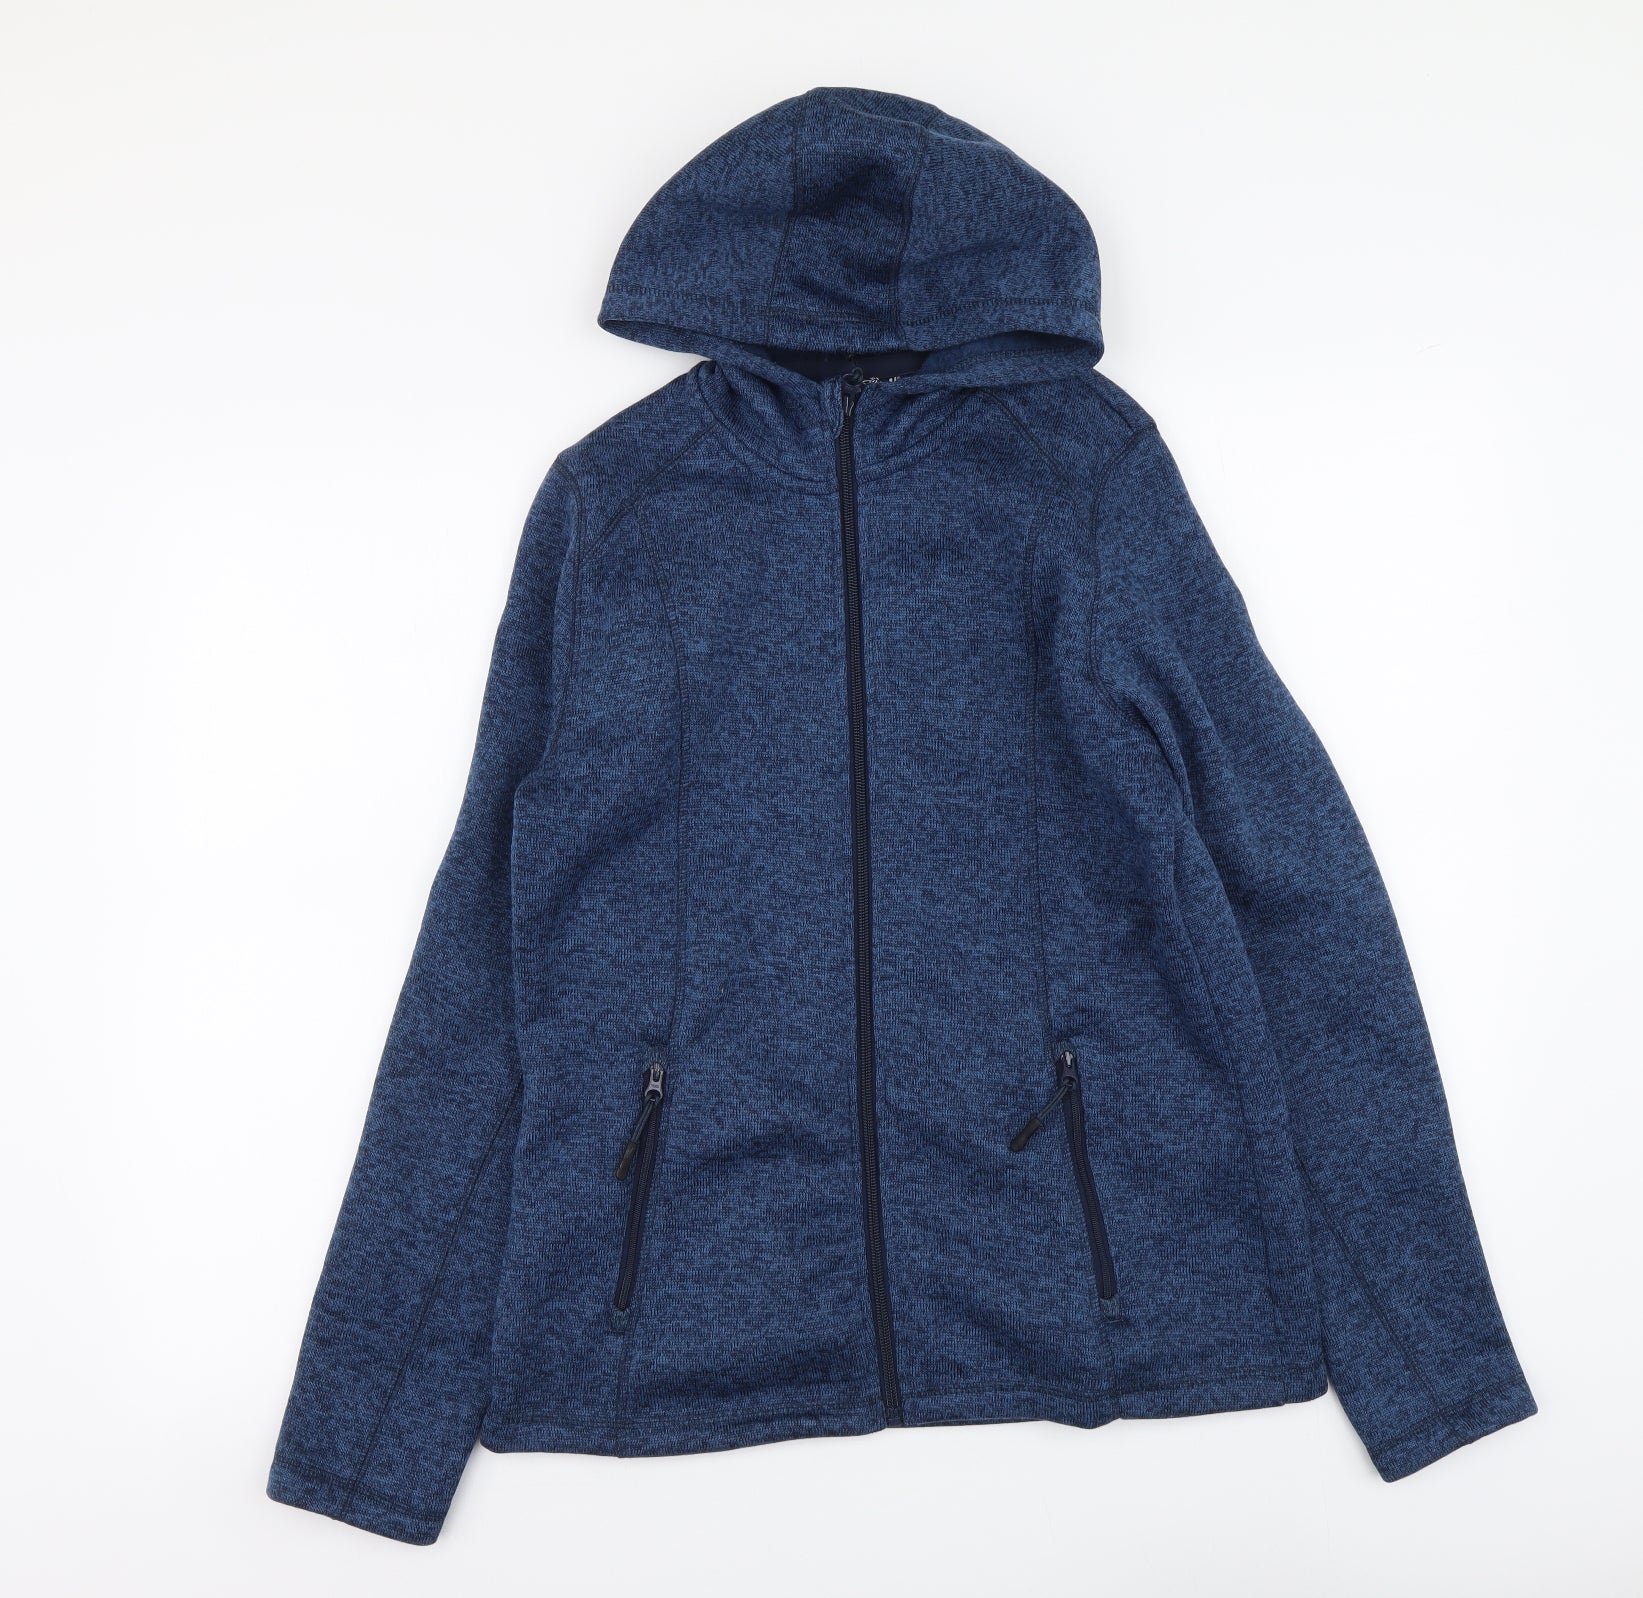 Hoodie (Blue) from Crivit